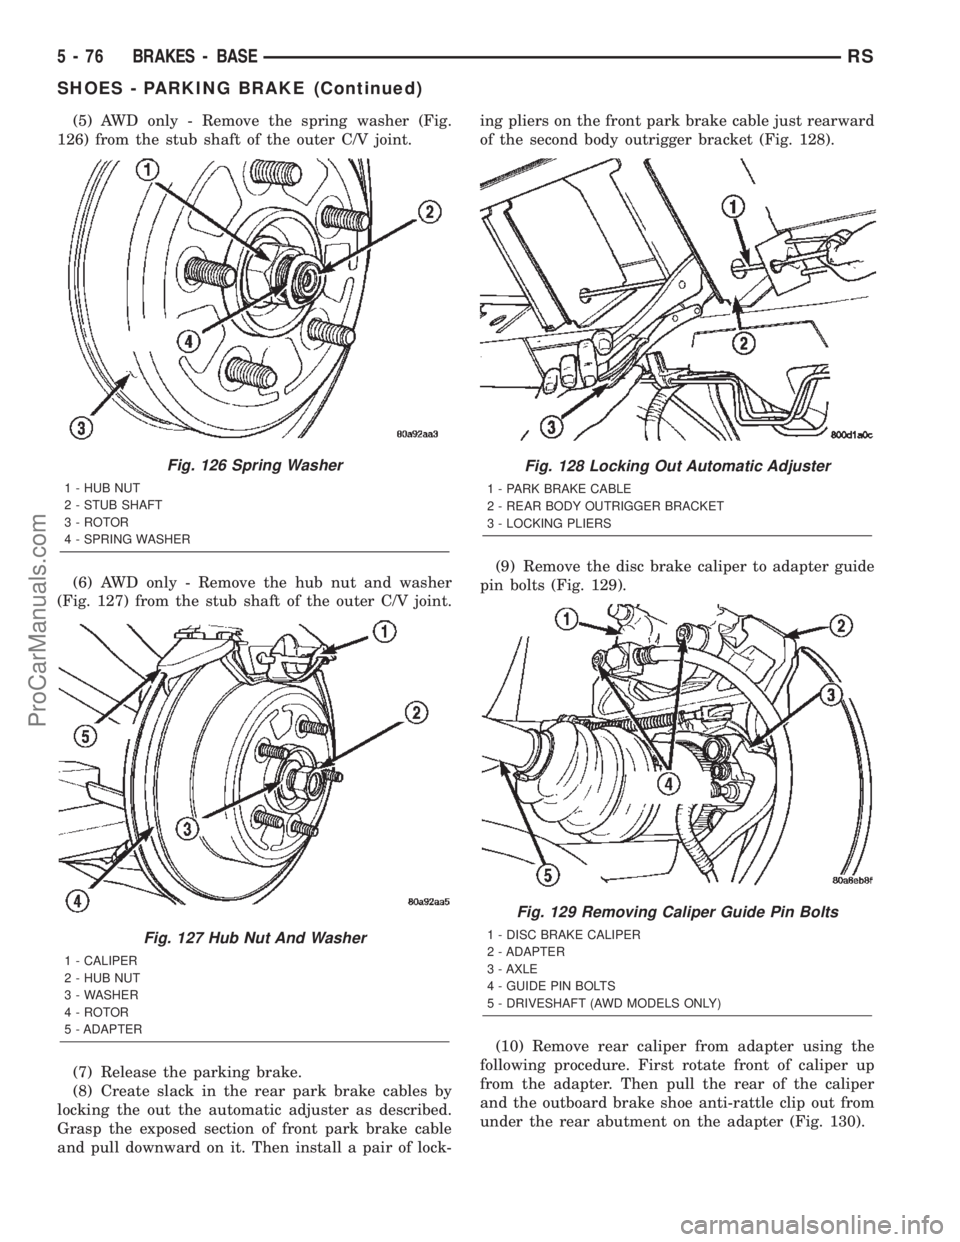 CHRYSLER CARAVAN 2002  Service Manual (5) AWD only - Remove the spring washer (Fig.
126) from the stub shaft of the outer C/V joint.
(6) AWD only - Remove the hub nut and washer
(Fig. 127) from the stub shaft of the outer C/V joint.
(7) R